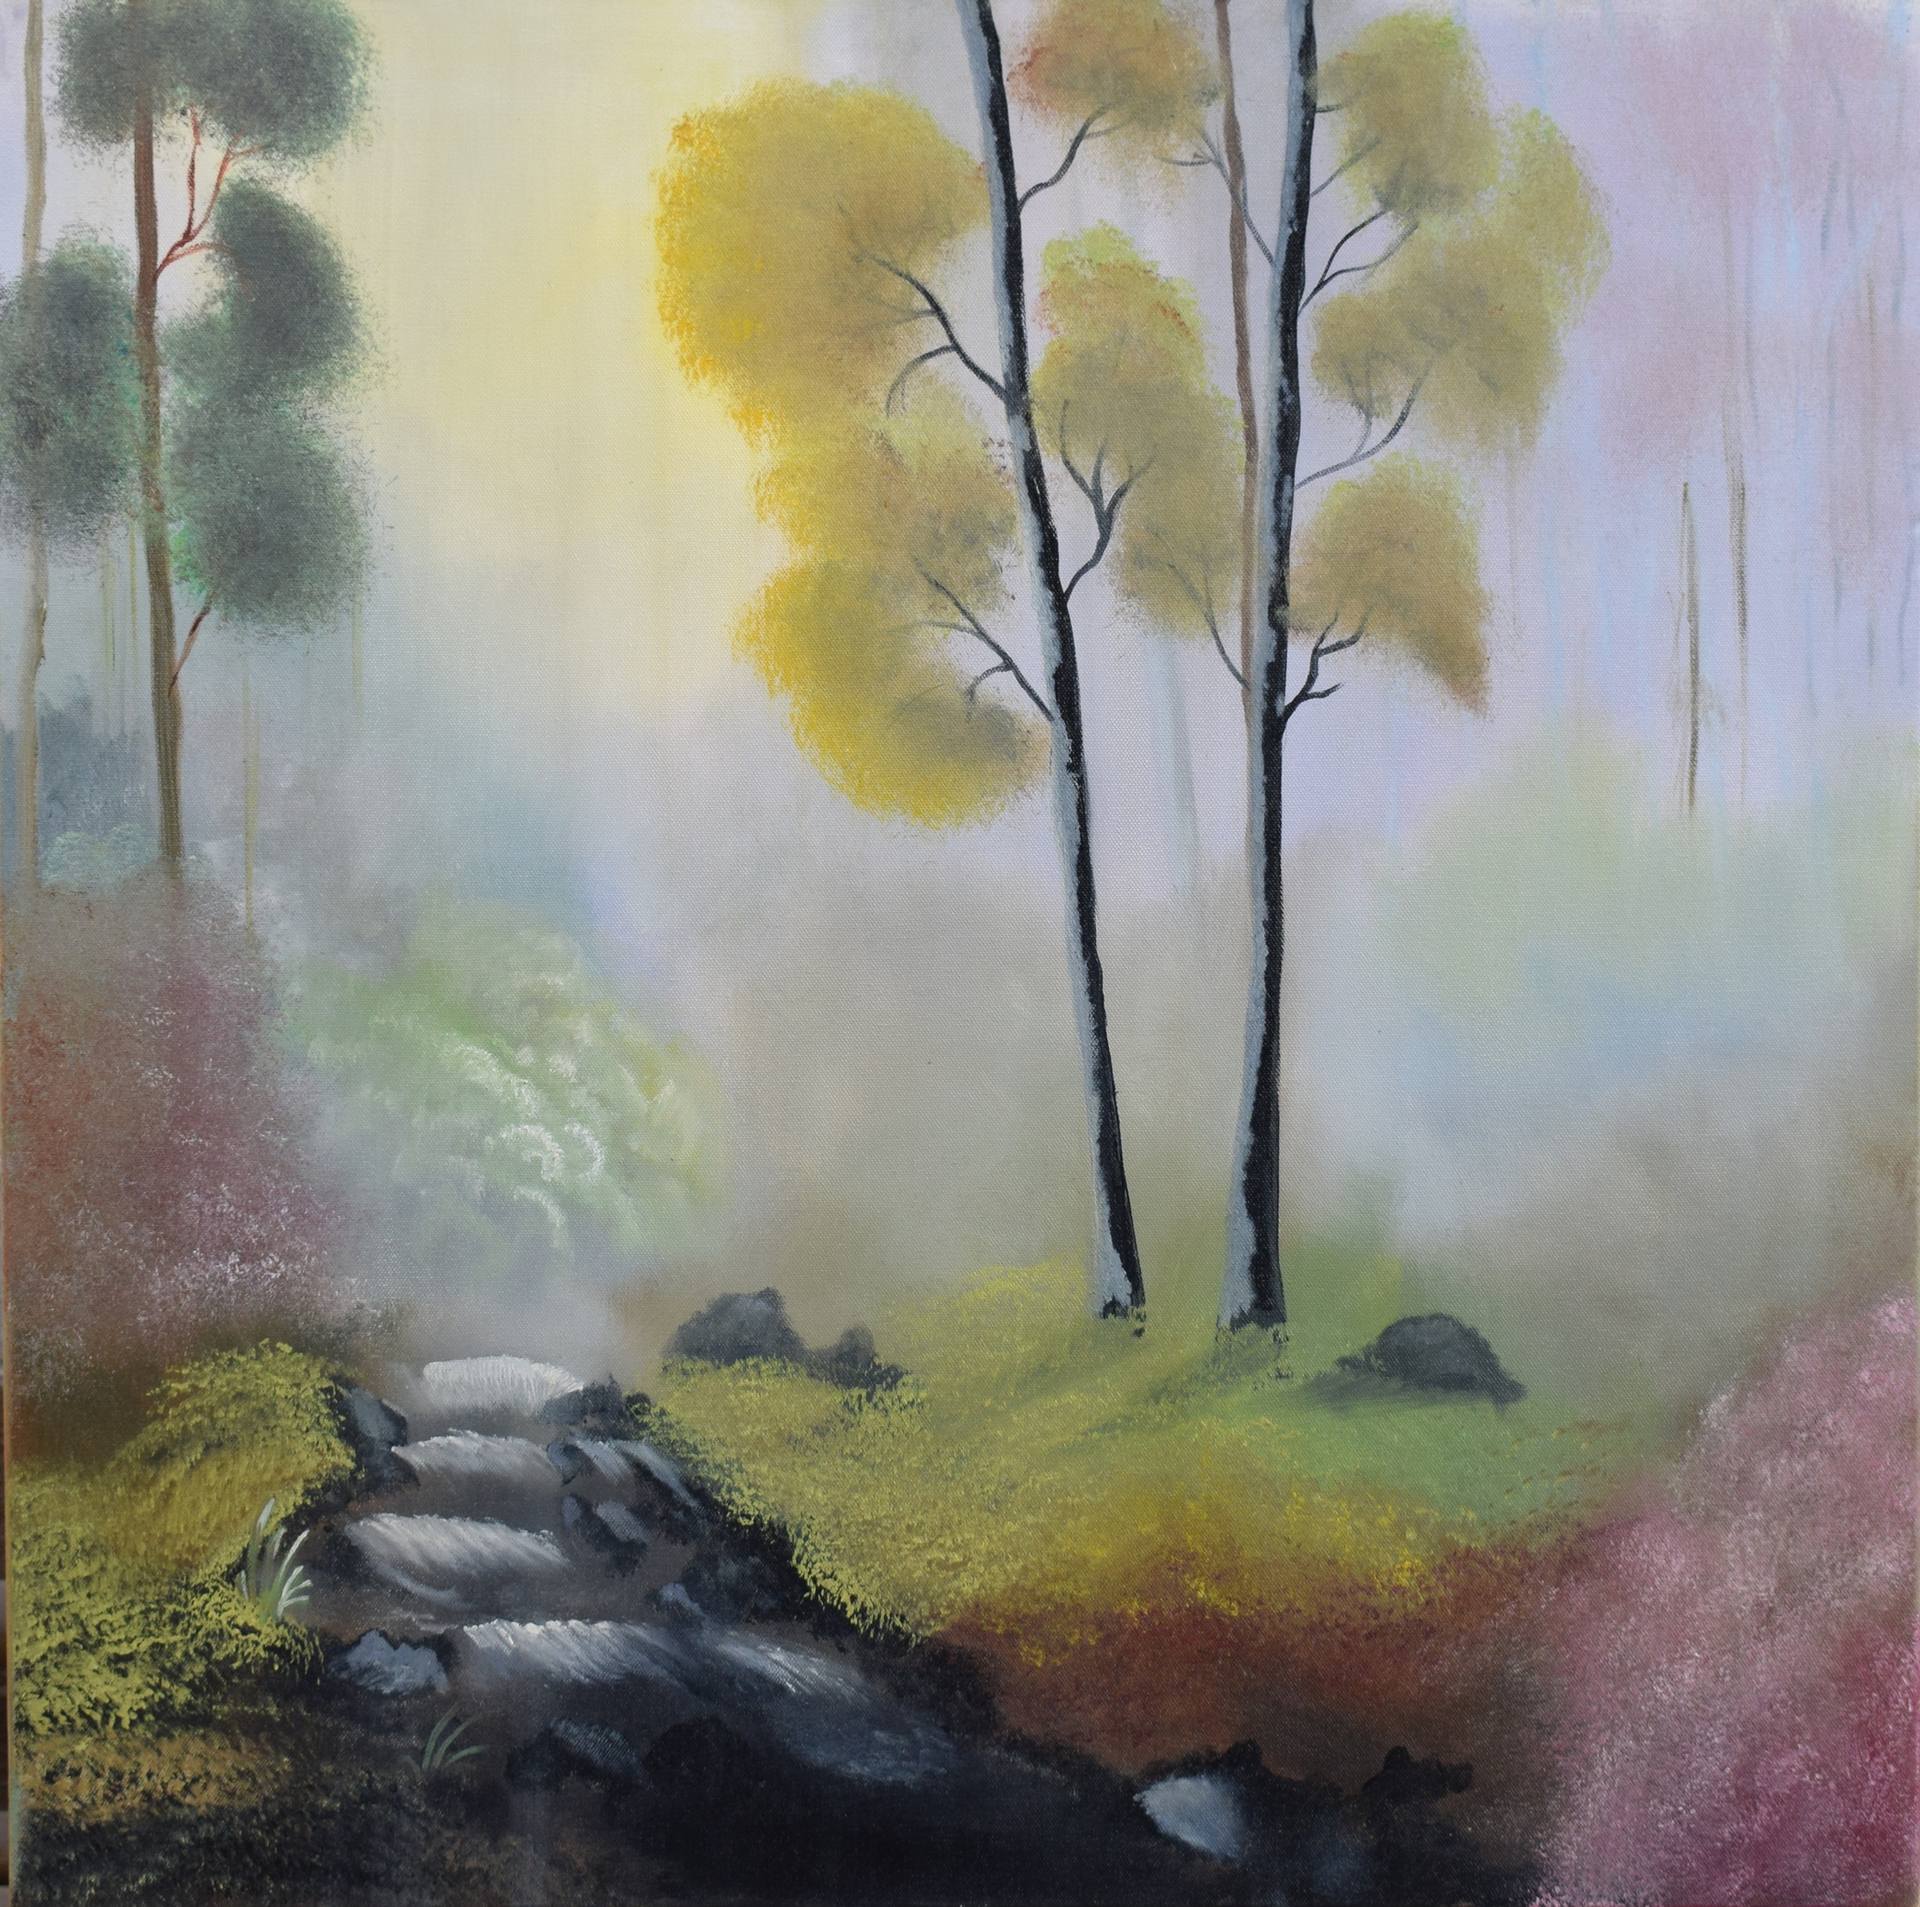 Foggy Morning Painting By Sudha, How To Paint Foggy Landscapes With Acrylics